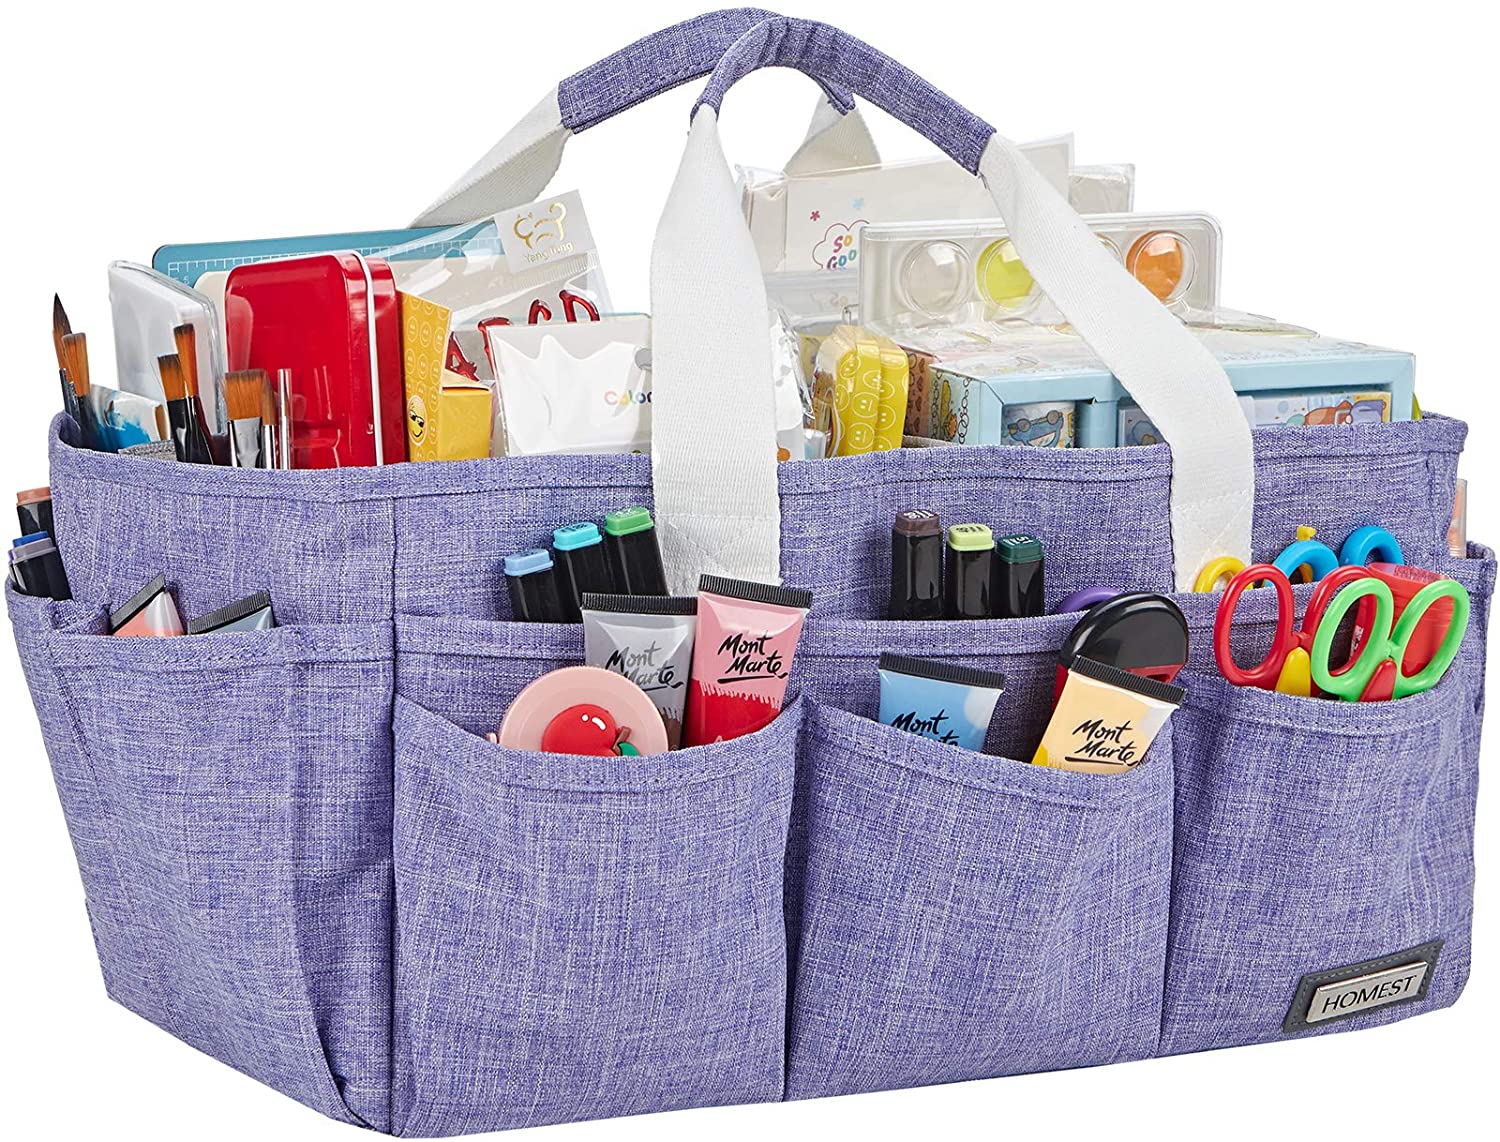 Homest craft organizer with multiple pockets